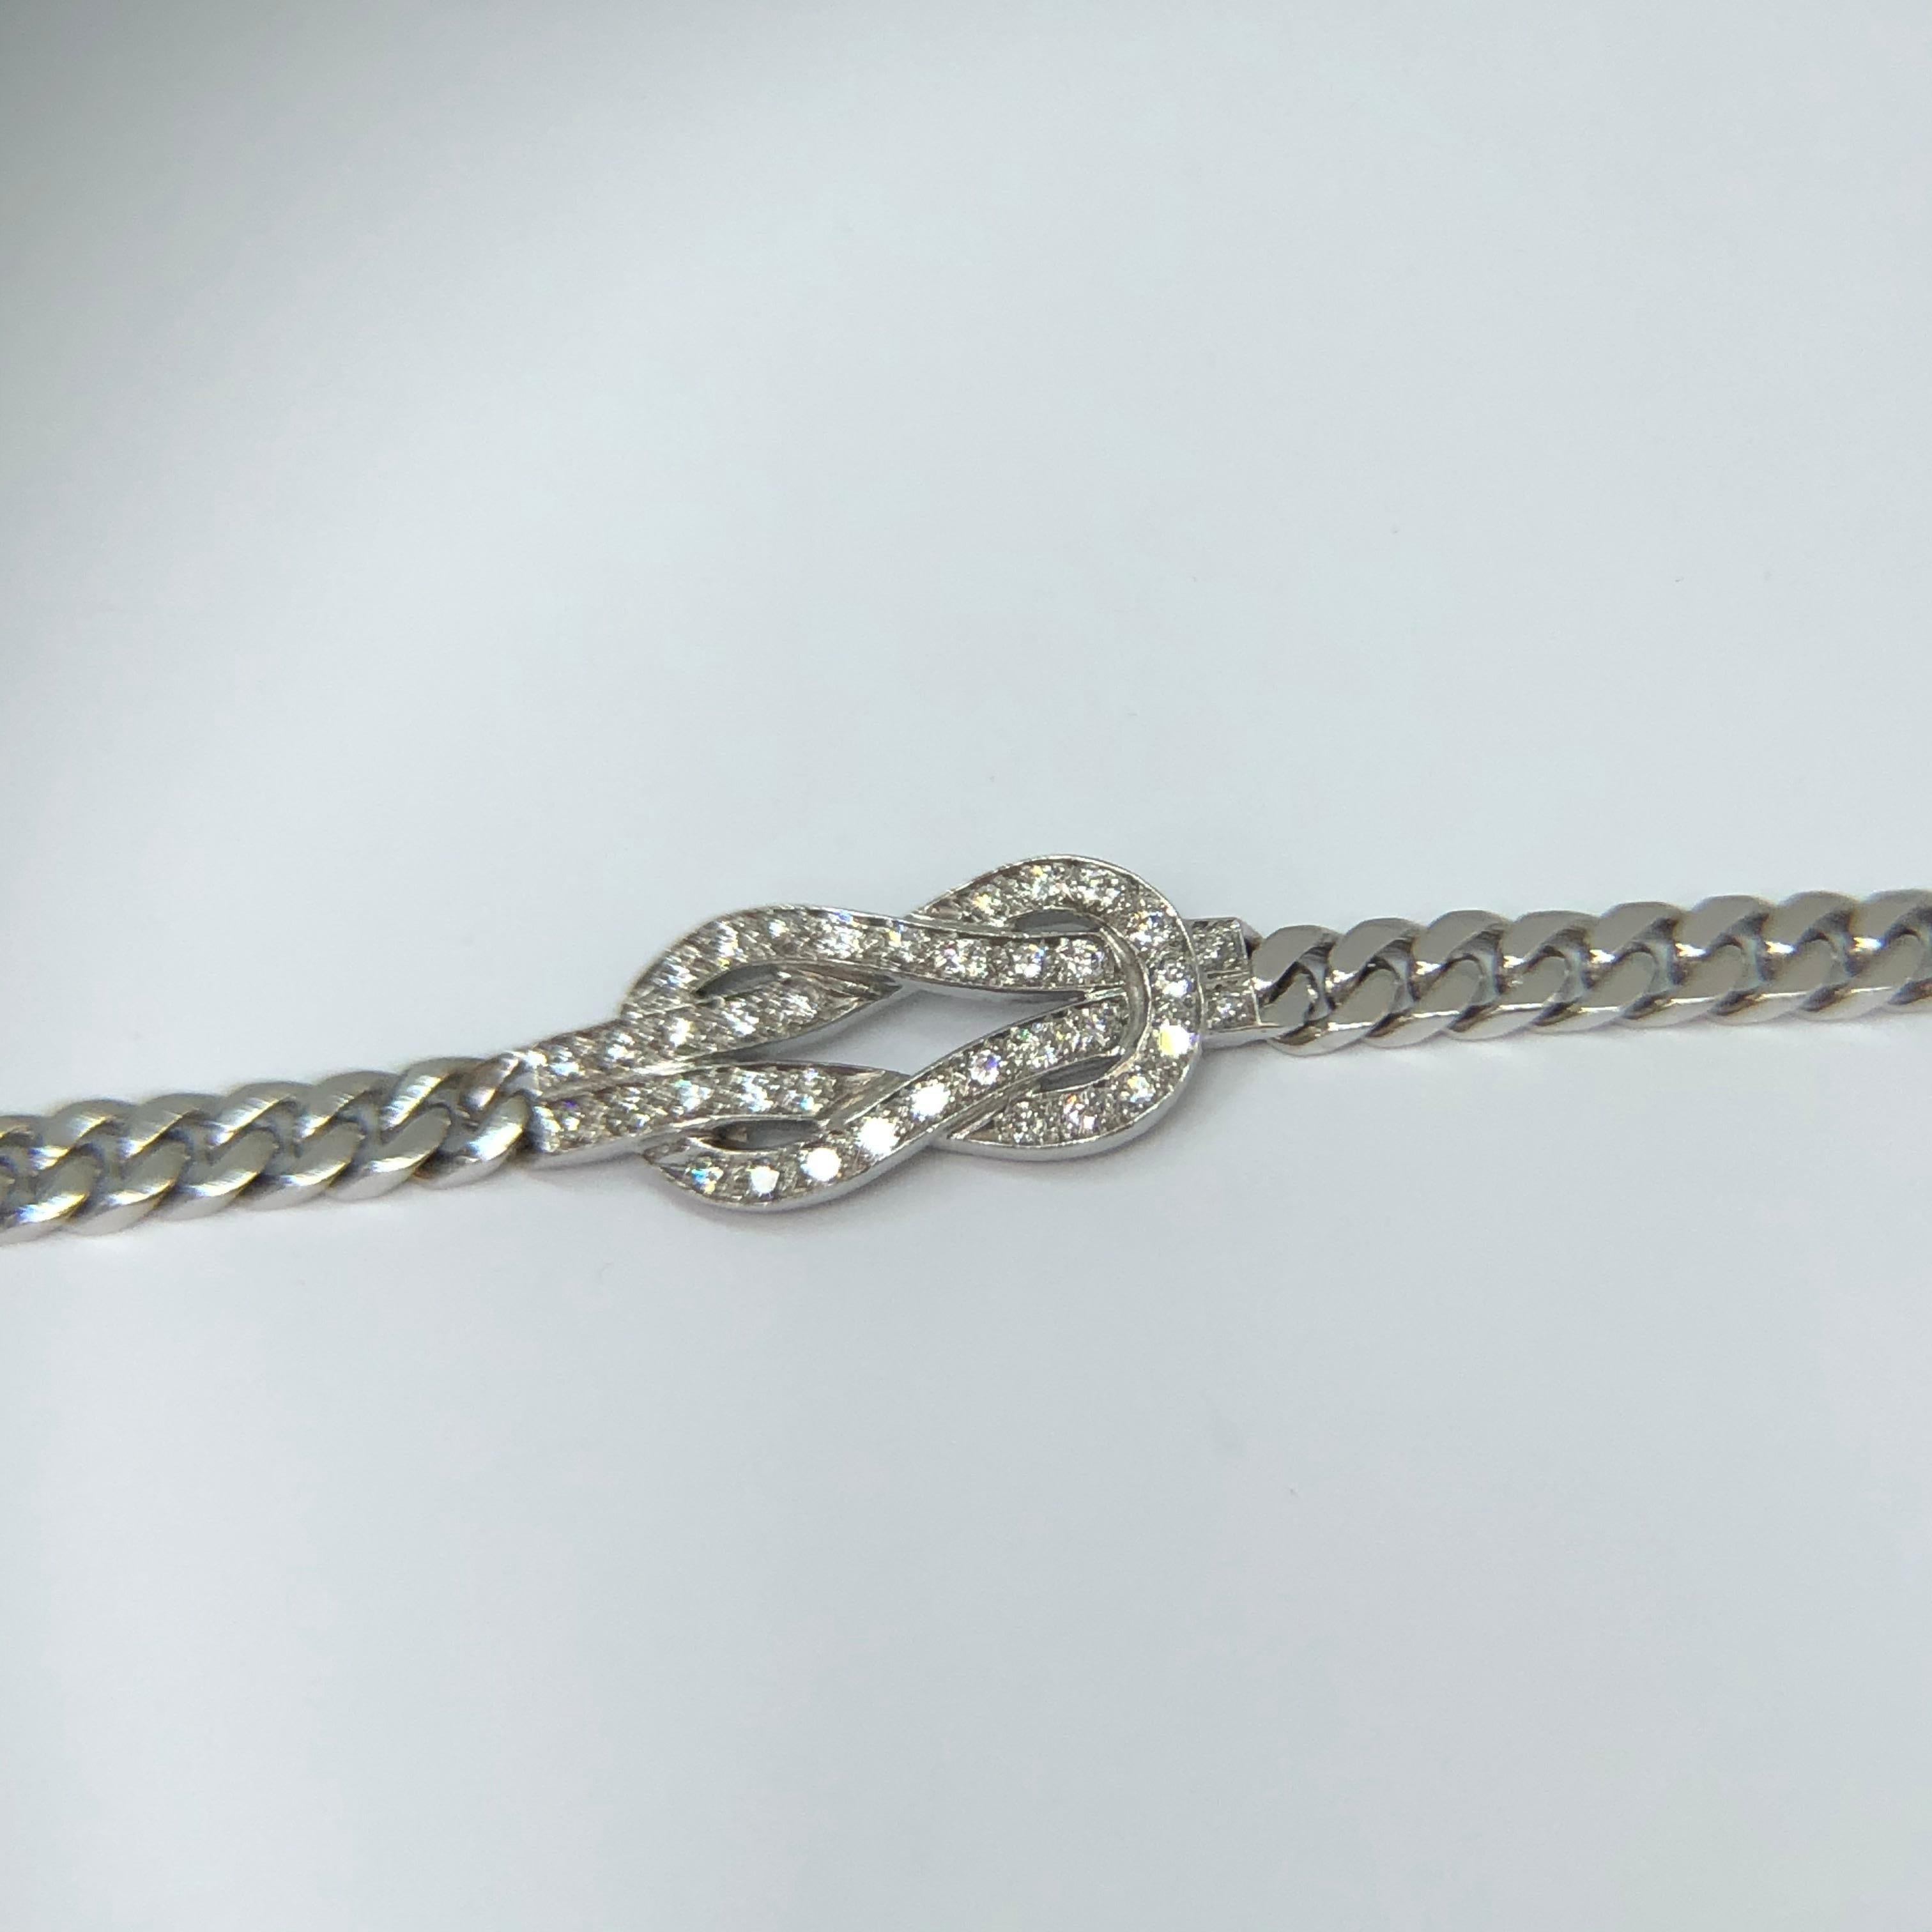 18k white gold bracelet with .75ct brilliant -cut diamond knot. The curb link chain measures 18.7cms but can be reduced in length. Weight 26.7gms 
The Herculean love knot signifies a tie that when stretched simply strengthens and cannot be broken.